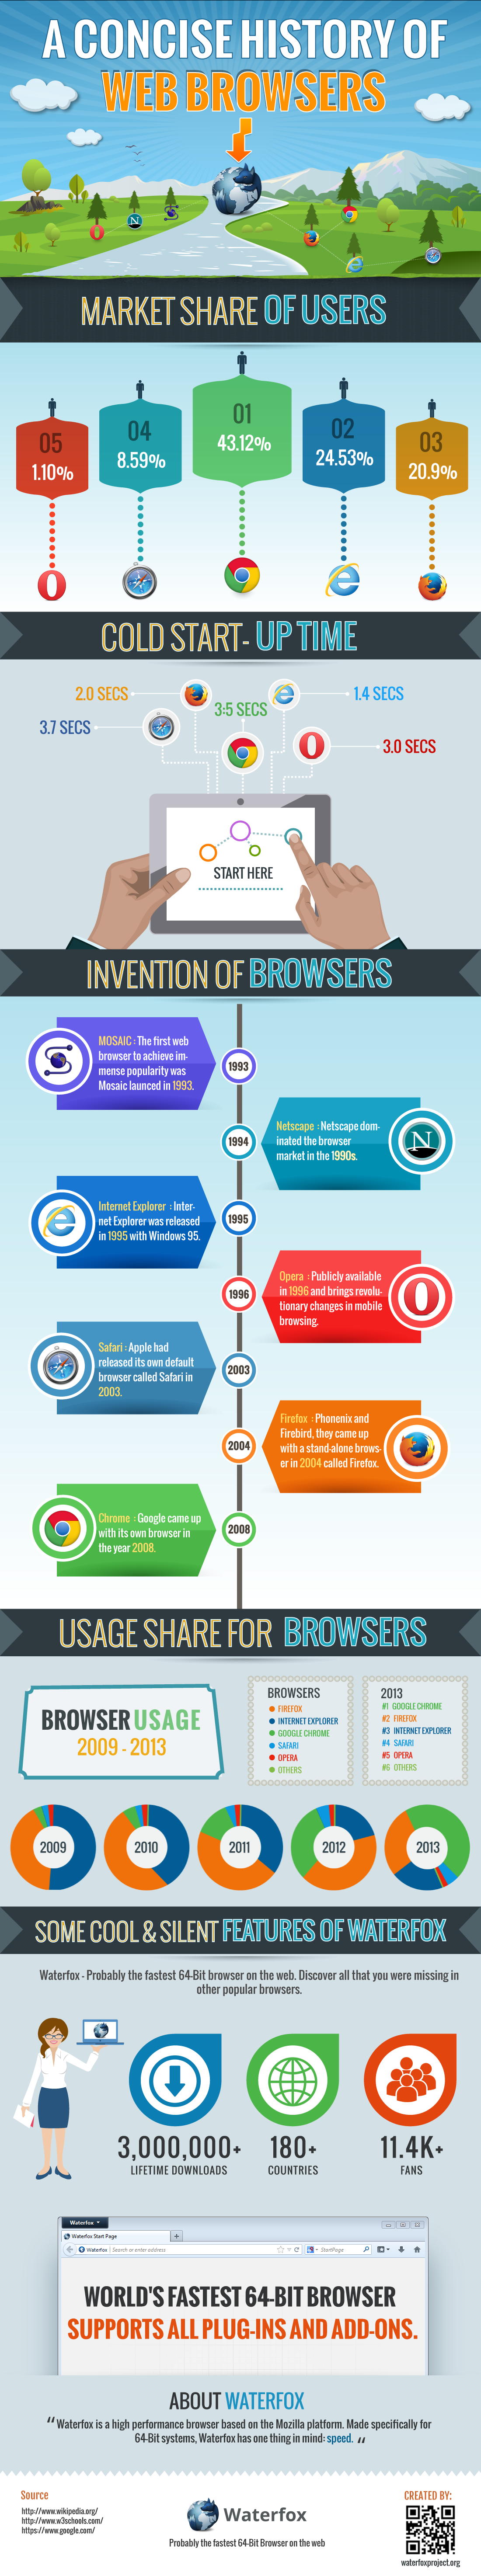 A Concise History of Web Browsers